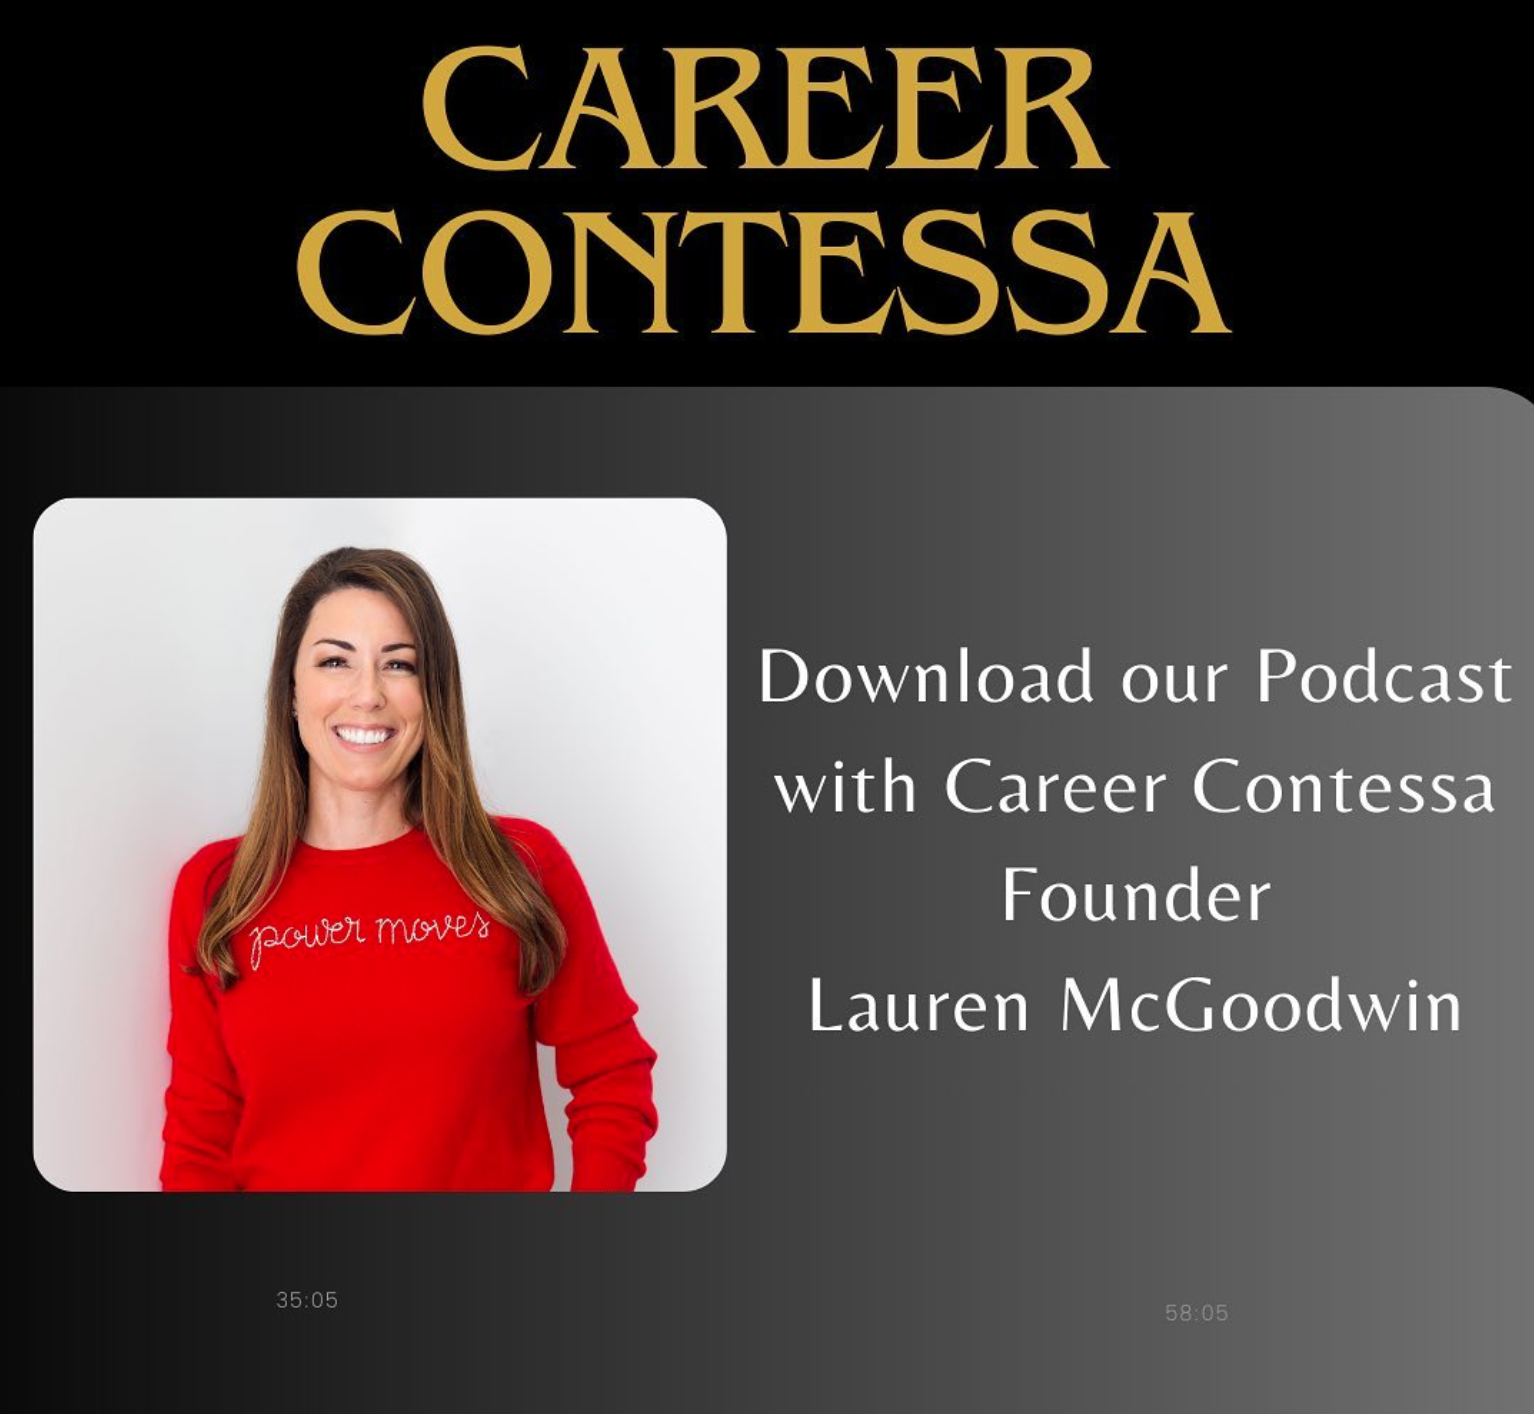 Career Contessa Founder Lauren McGoodwin on Entitlement, The Illusion of The Perfect Job and Managing Her Business